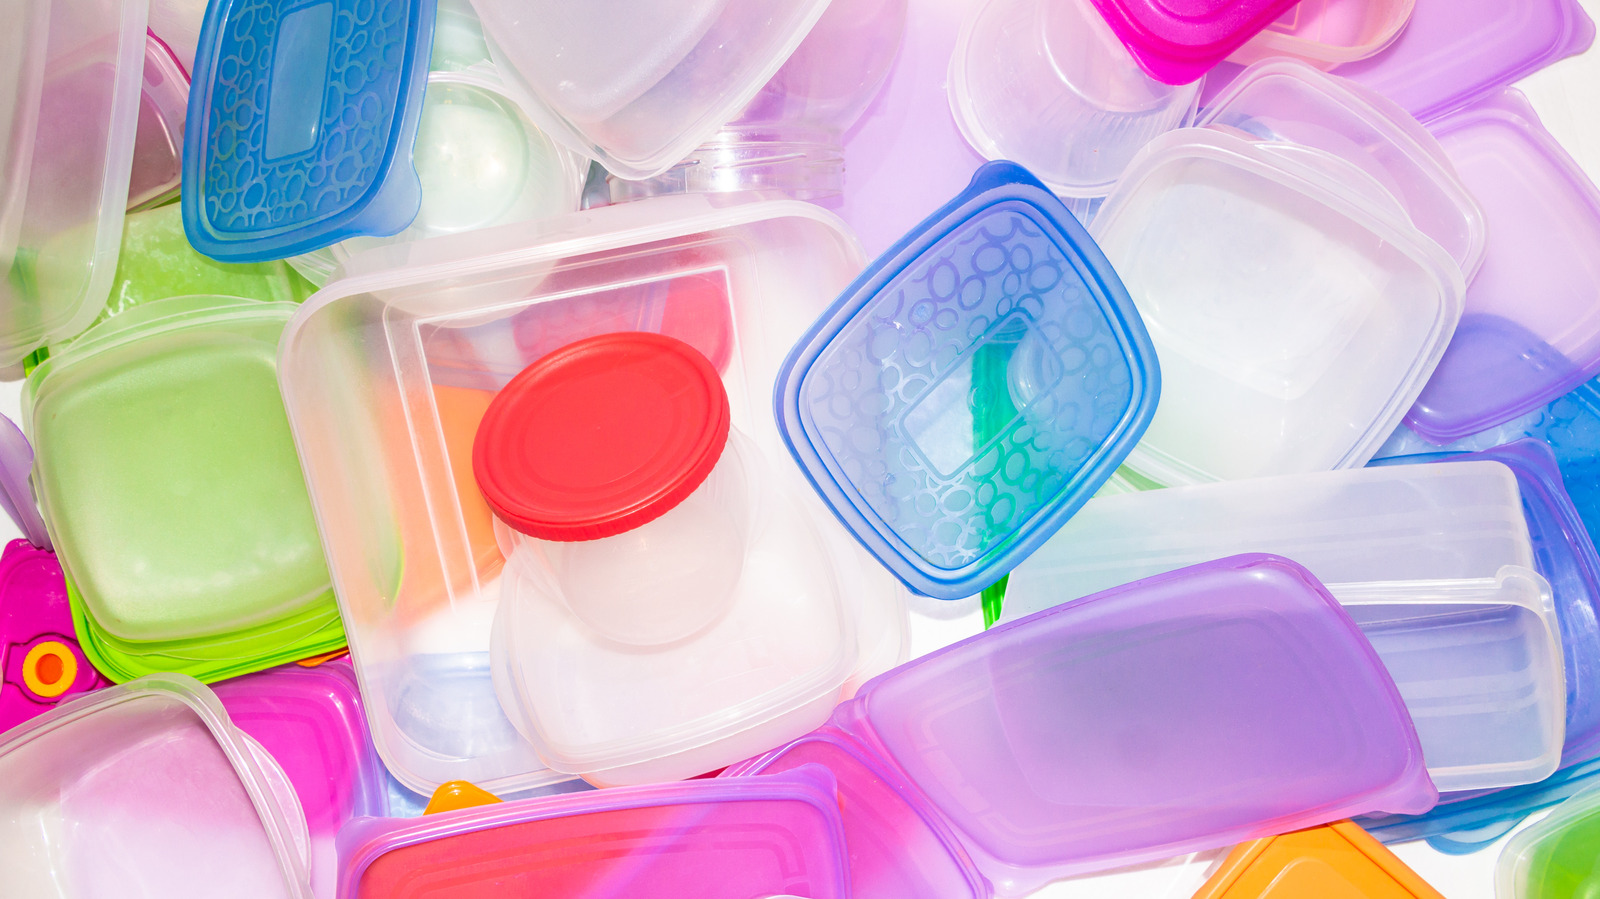 What To Do With Your Old Plastic Tupperware Containers - The Eco Hub